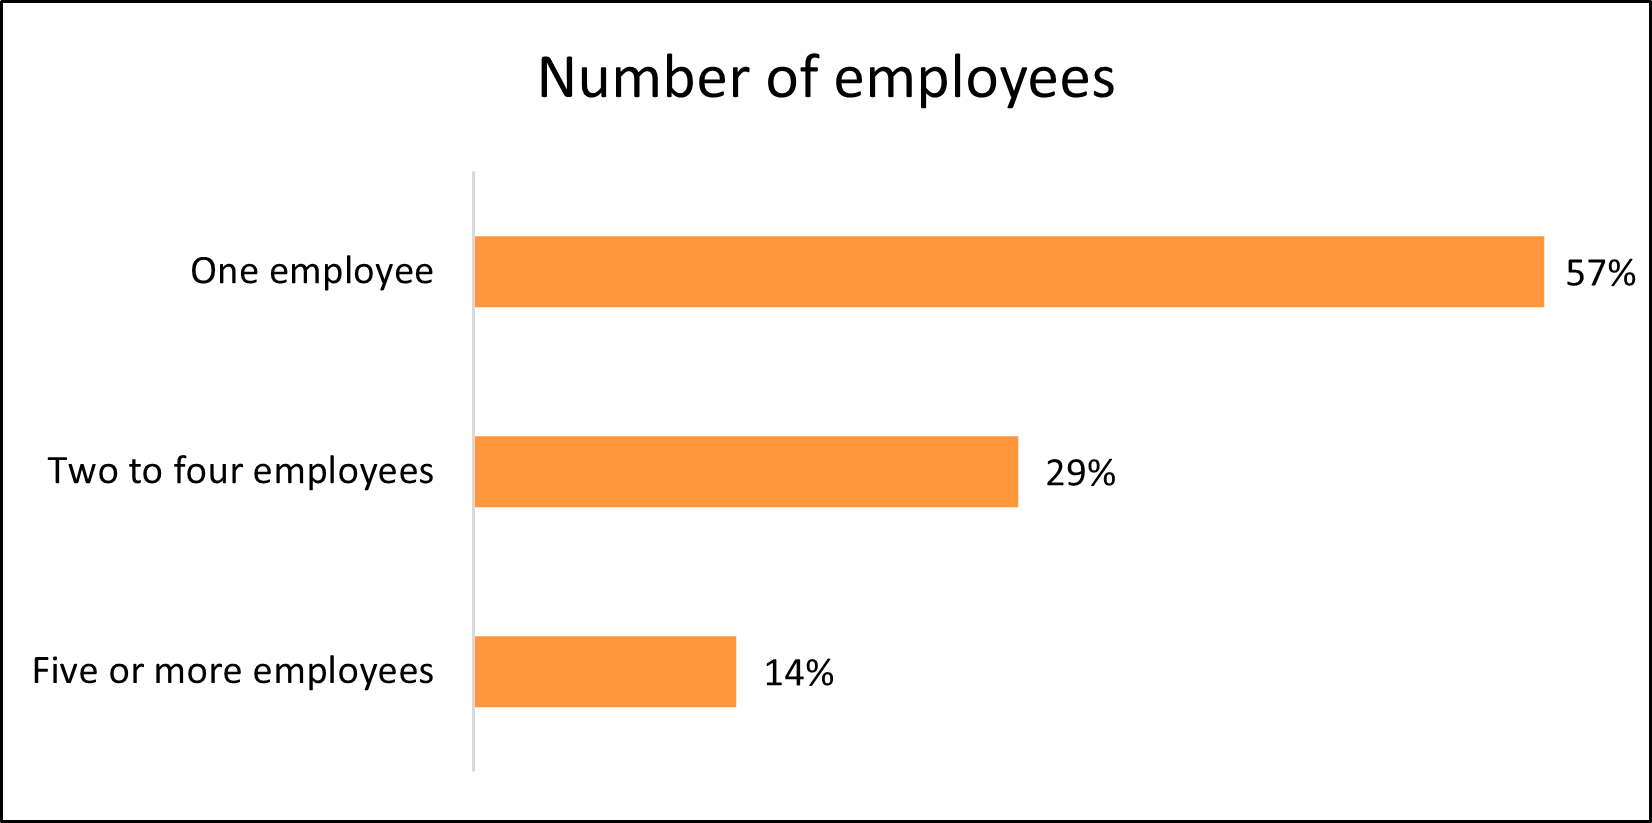 Number of employees for Insureon small business customers.